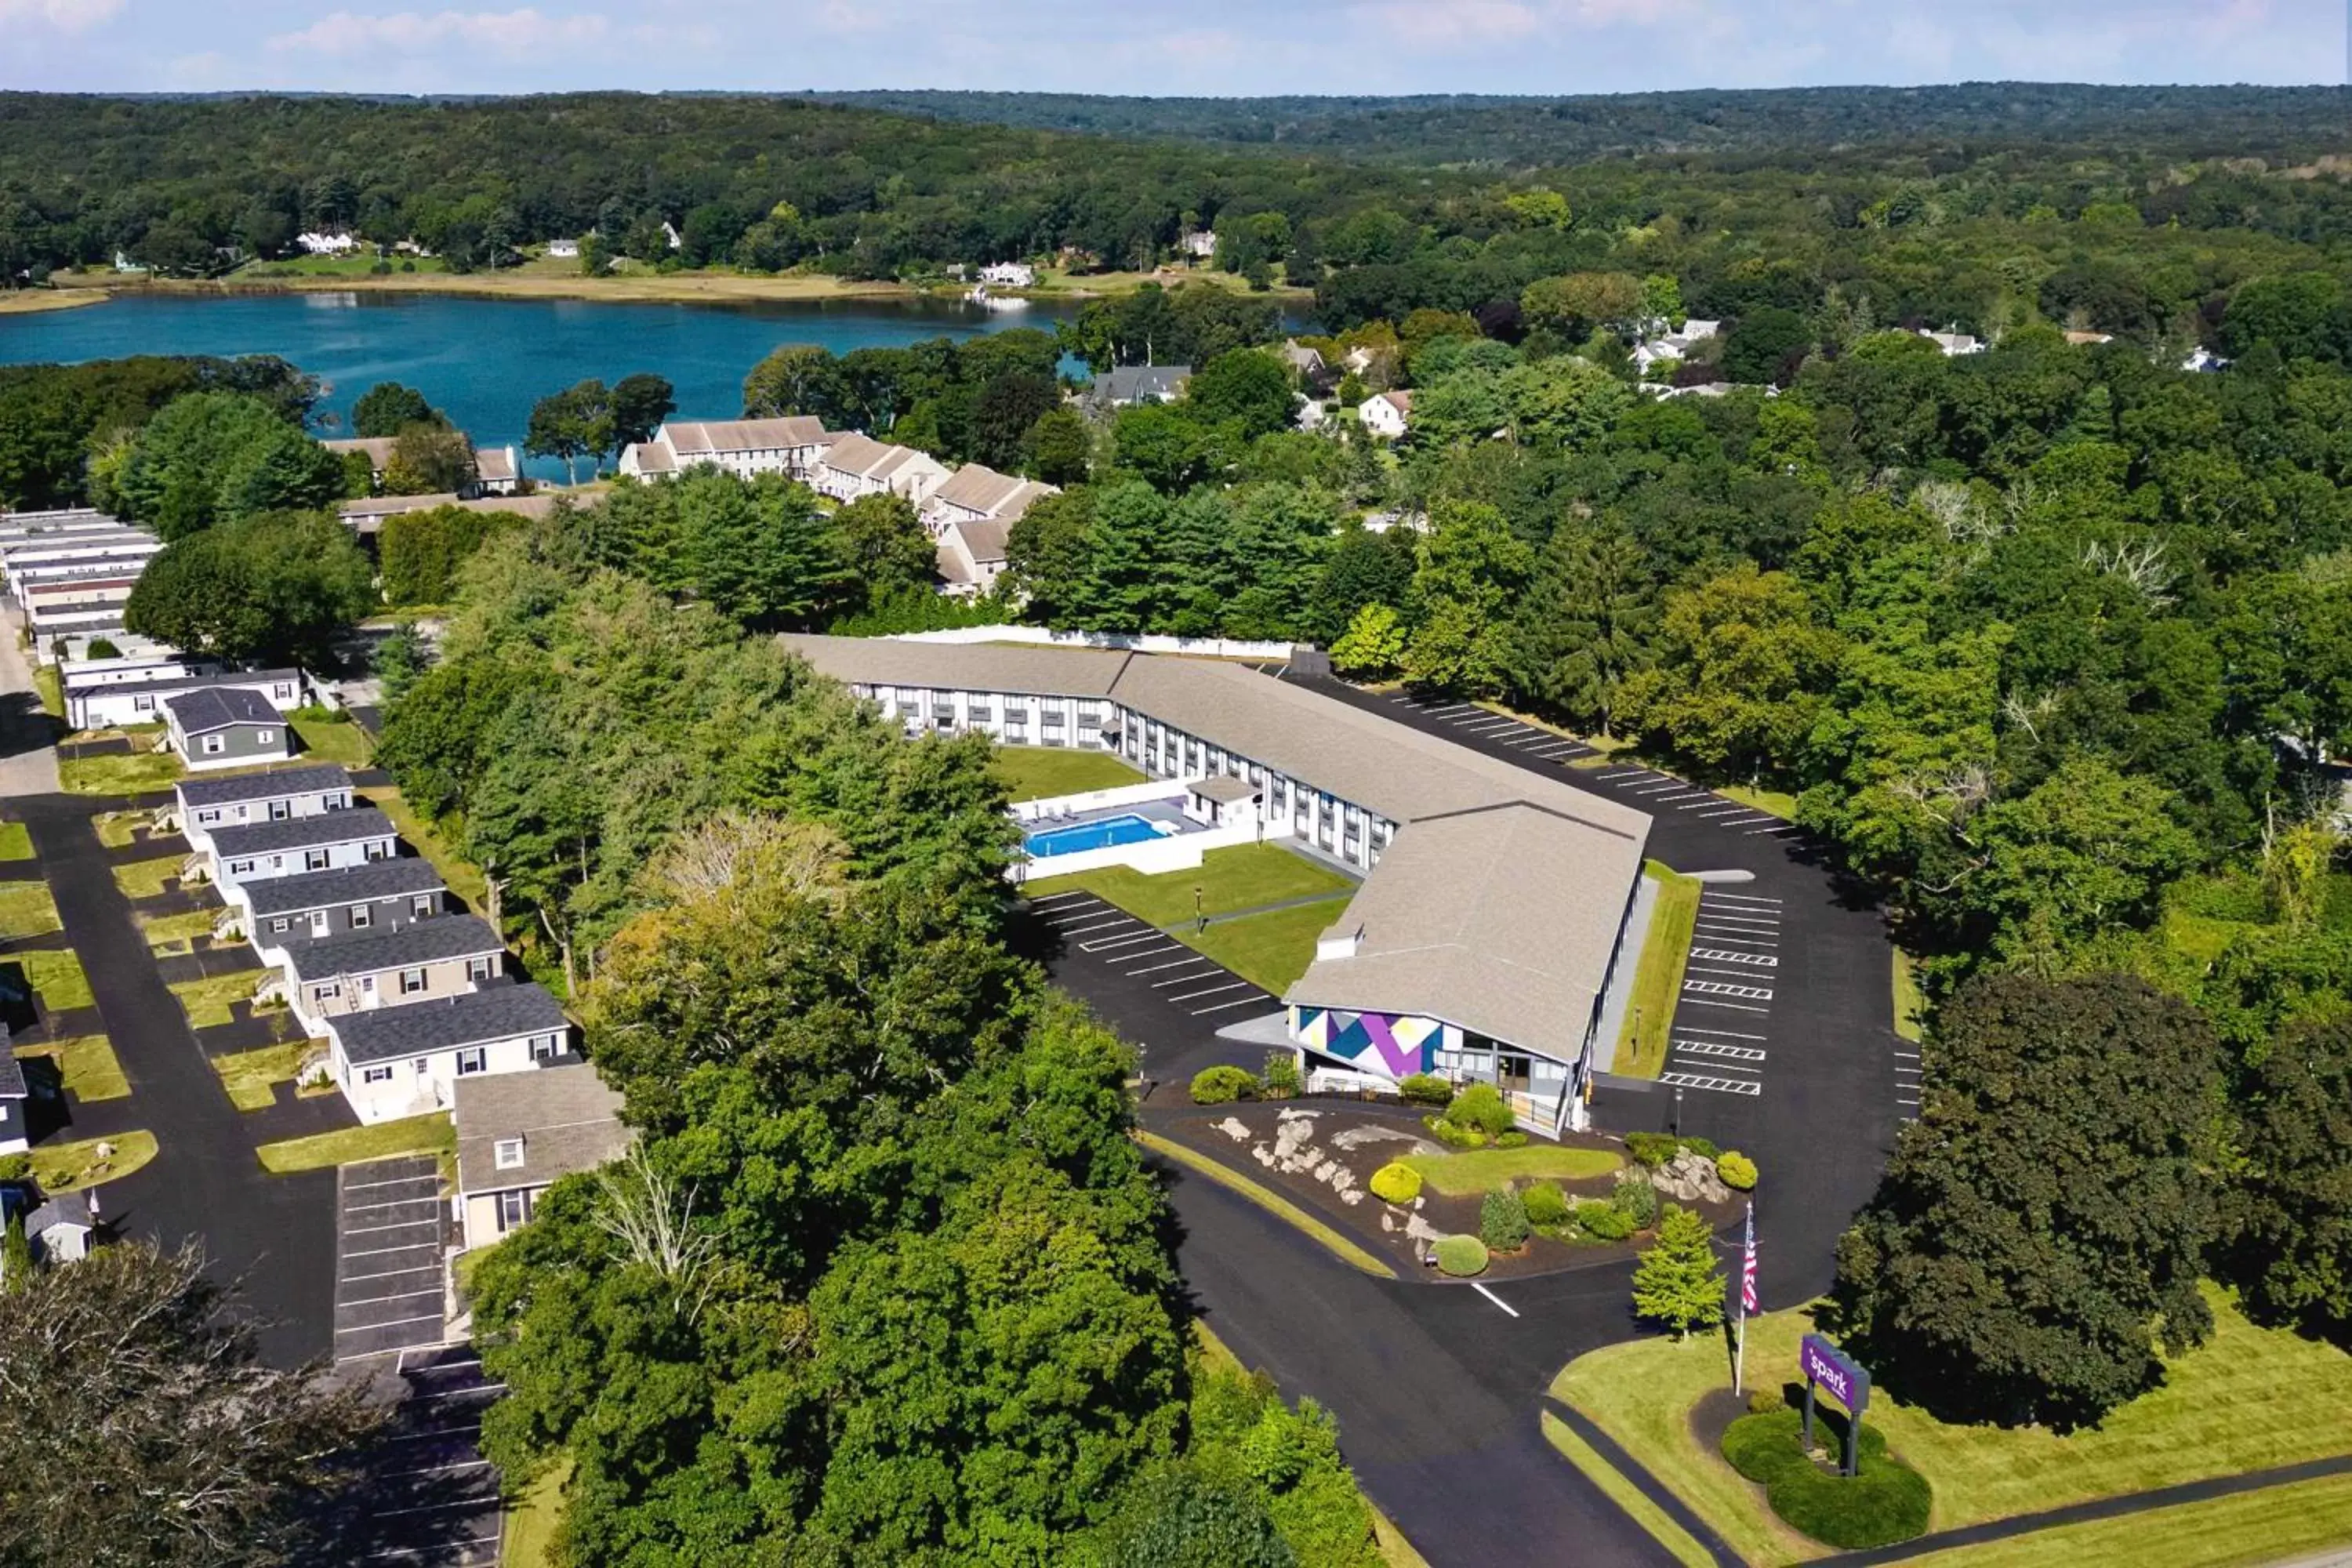 Property building, Bird's-eye View in Spark By Hilton Mystic Groton